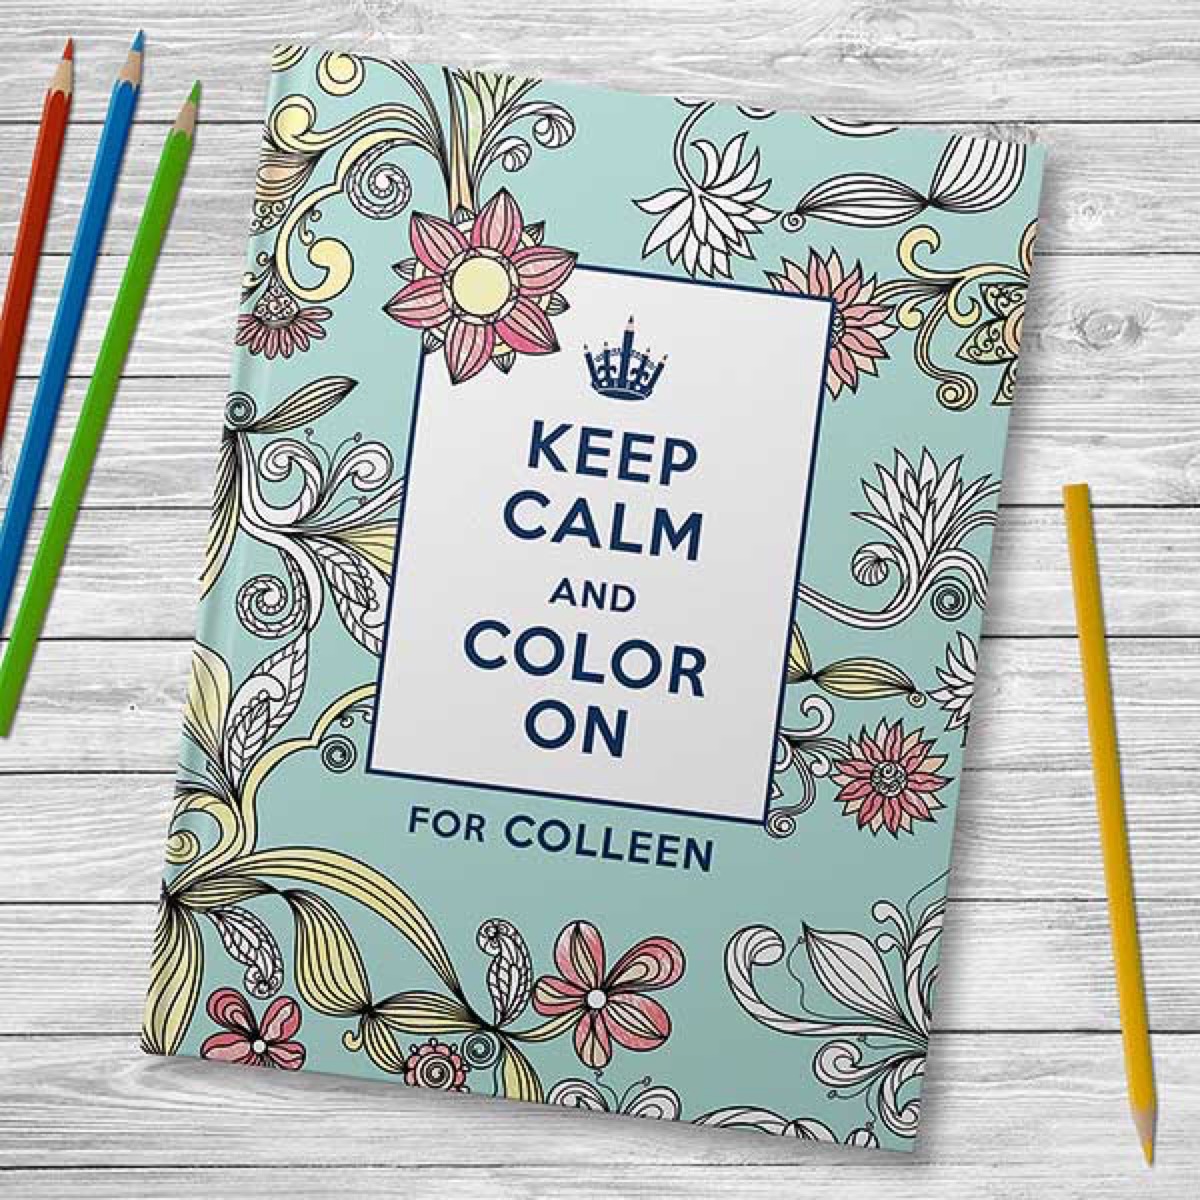 keep calm and color on coloring book and colored pencils